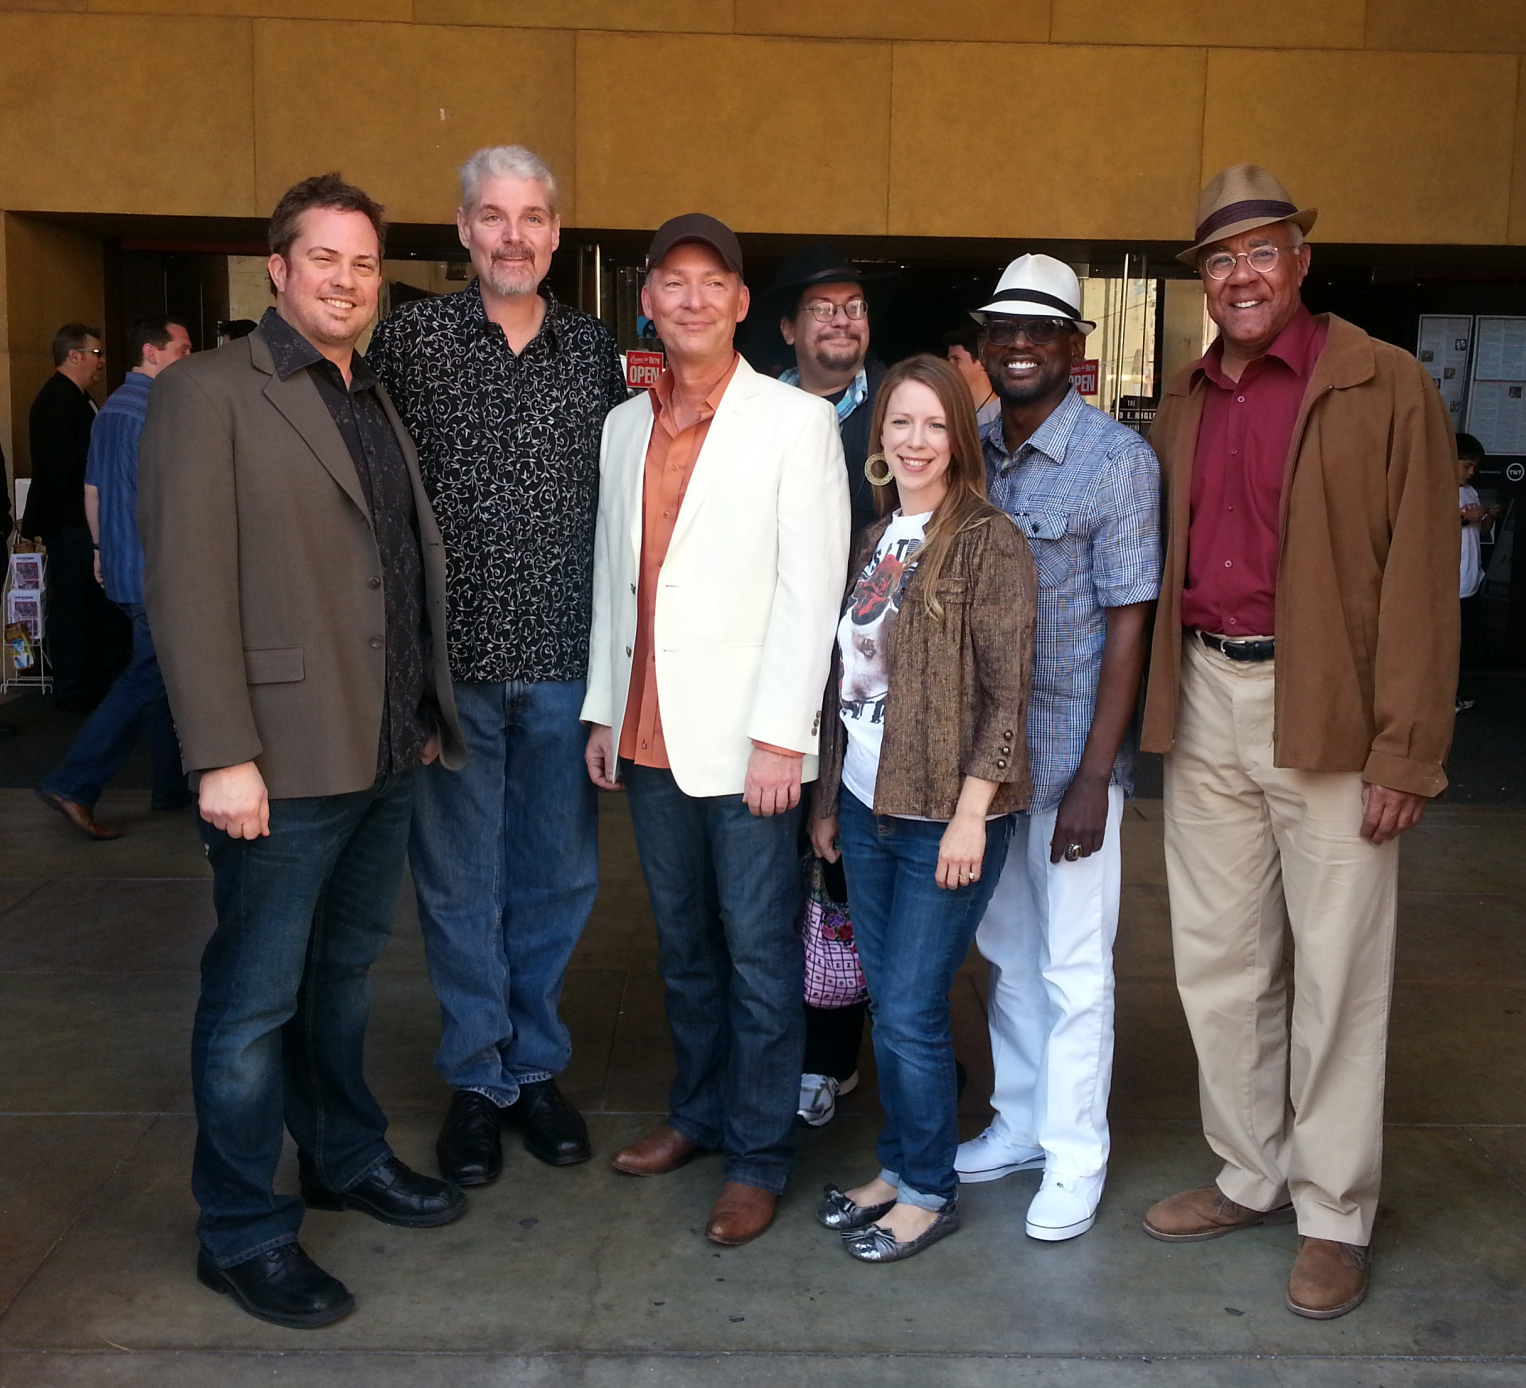 Jimmy Mac McInerny, Tom Kane, Stephen Stanton, Trey Stokes, Anna Graves & Rick Fitts at Return of the Jedi 30th Anniversary screening, Egyptian theatre in Hollywood (2013)